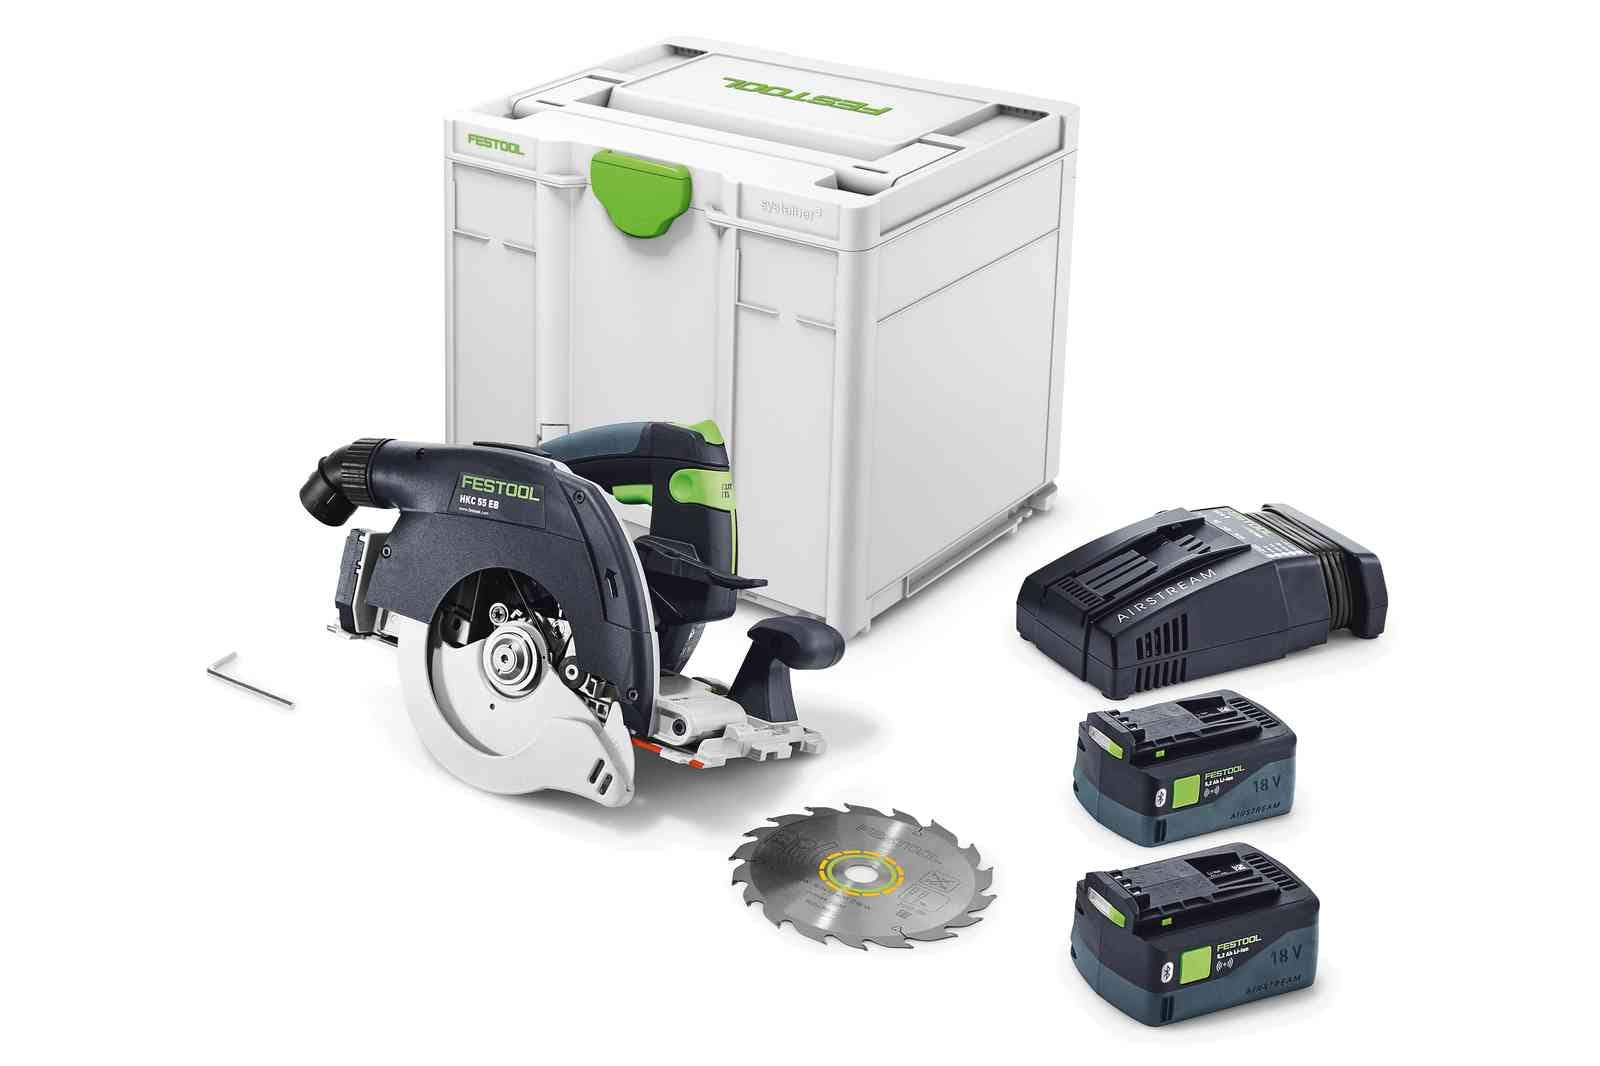 Festool 577680 HKC 55 Cordless Track Saw PLUS w/ Systainer3